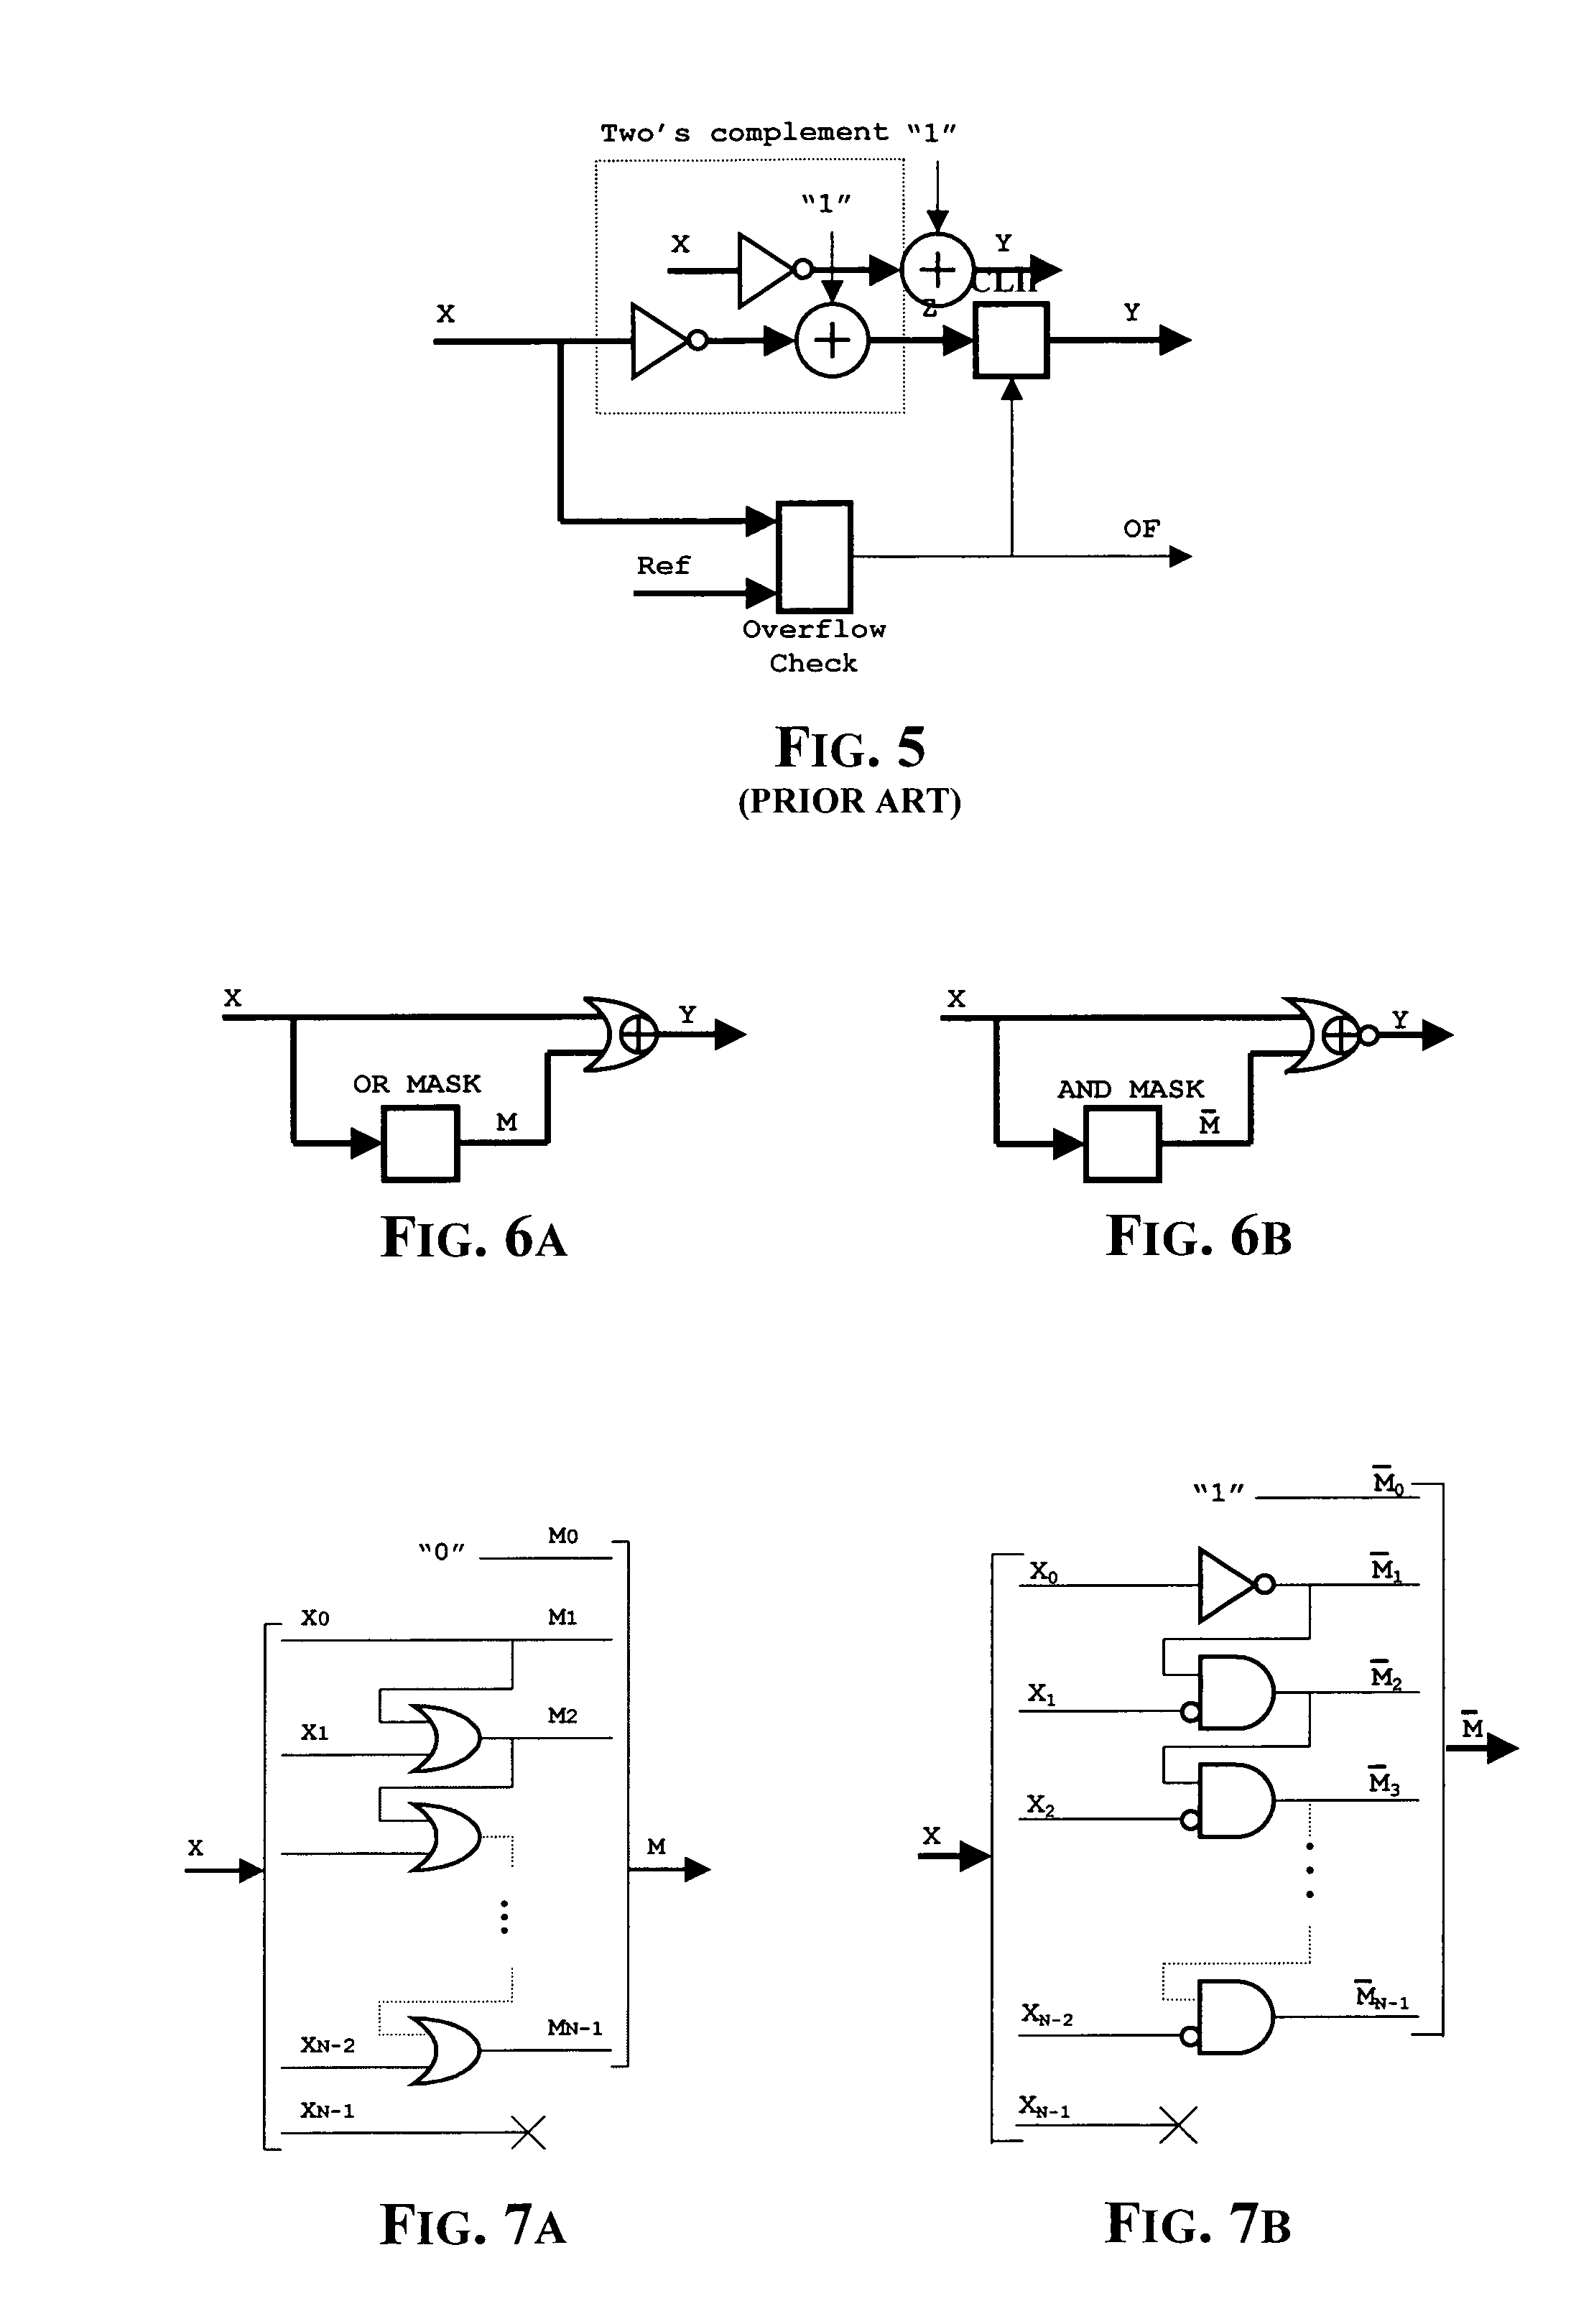 Method and relative circuit for incrementing, decrementing or two's complementing a bit string